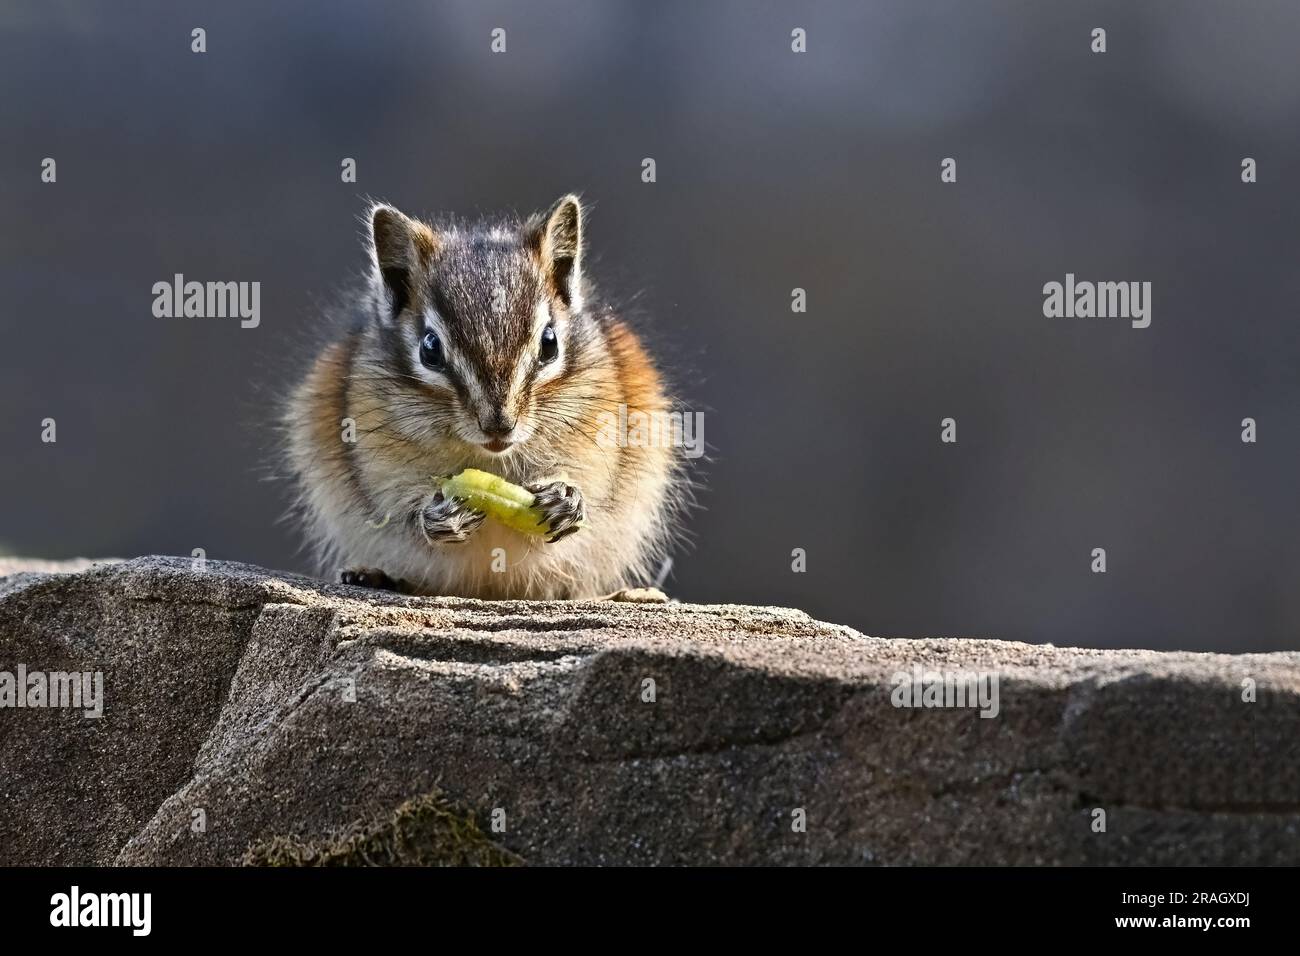 A front view of a least chipmunk, 'Eutamias minimus',resting on a rock holding apiece of vegetation Stock Photo